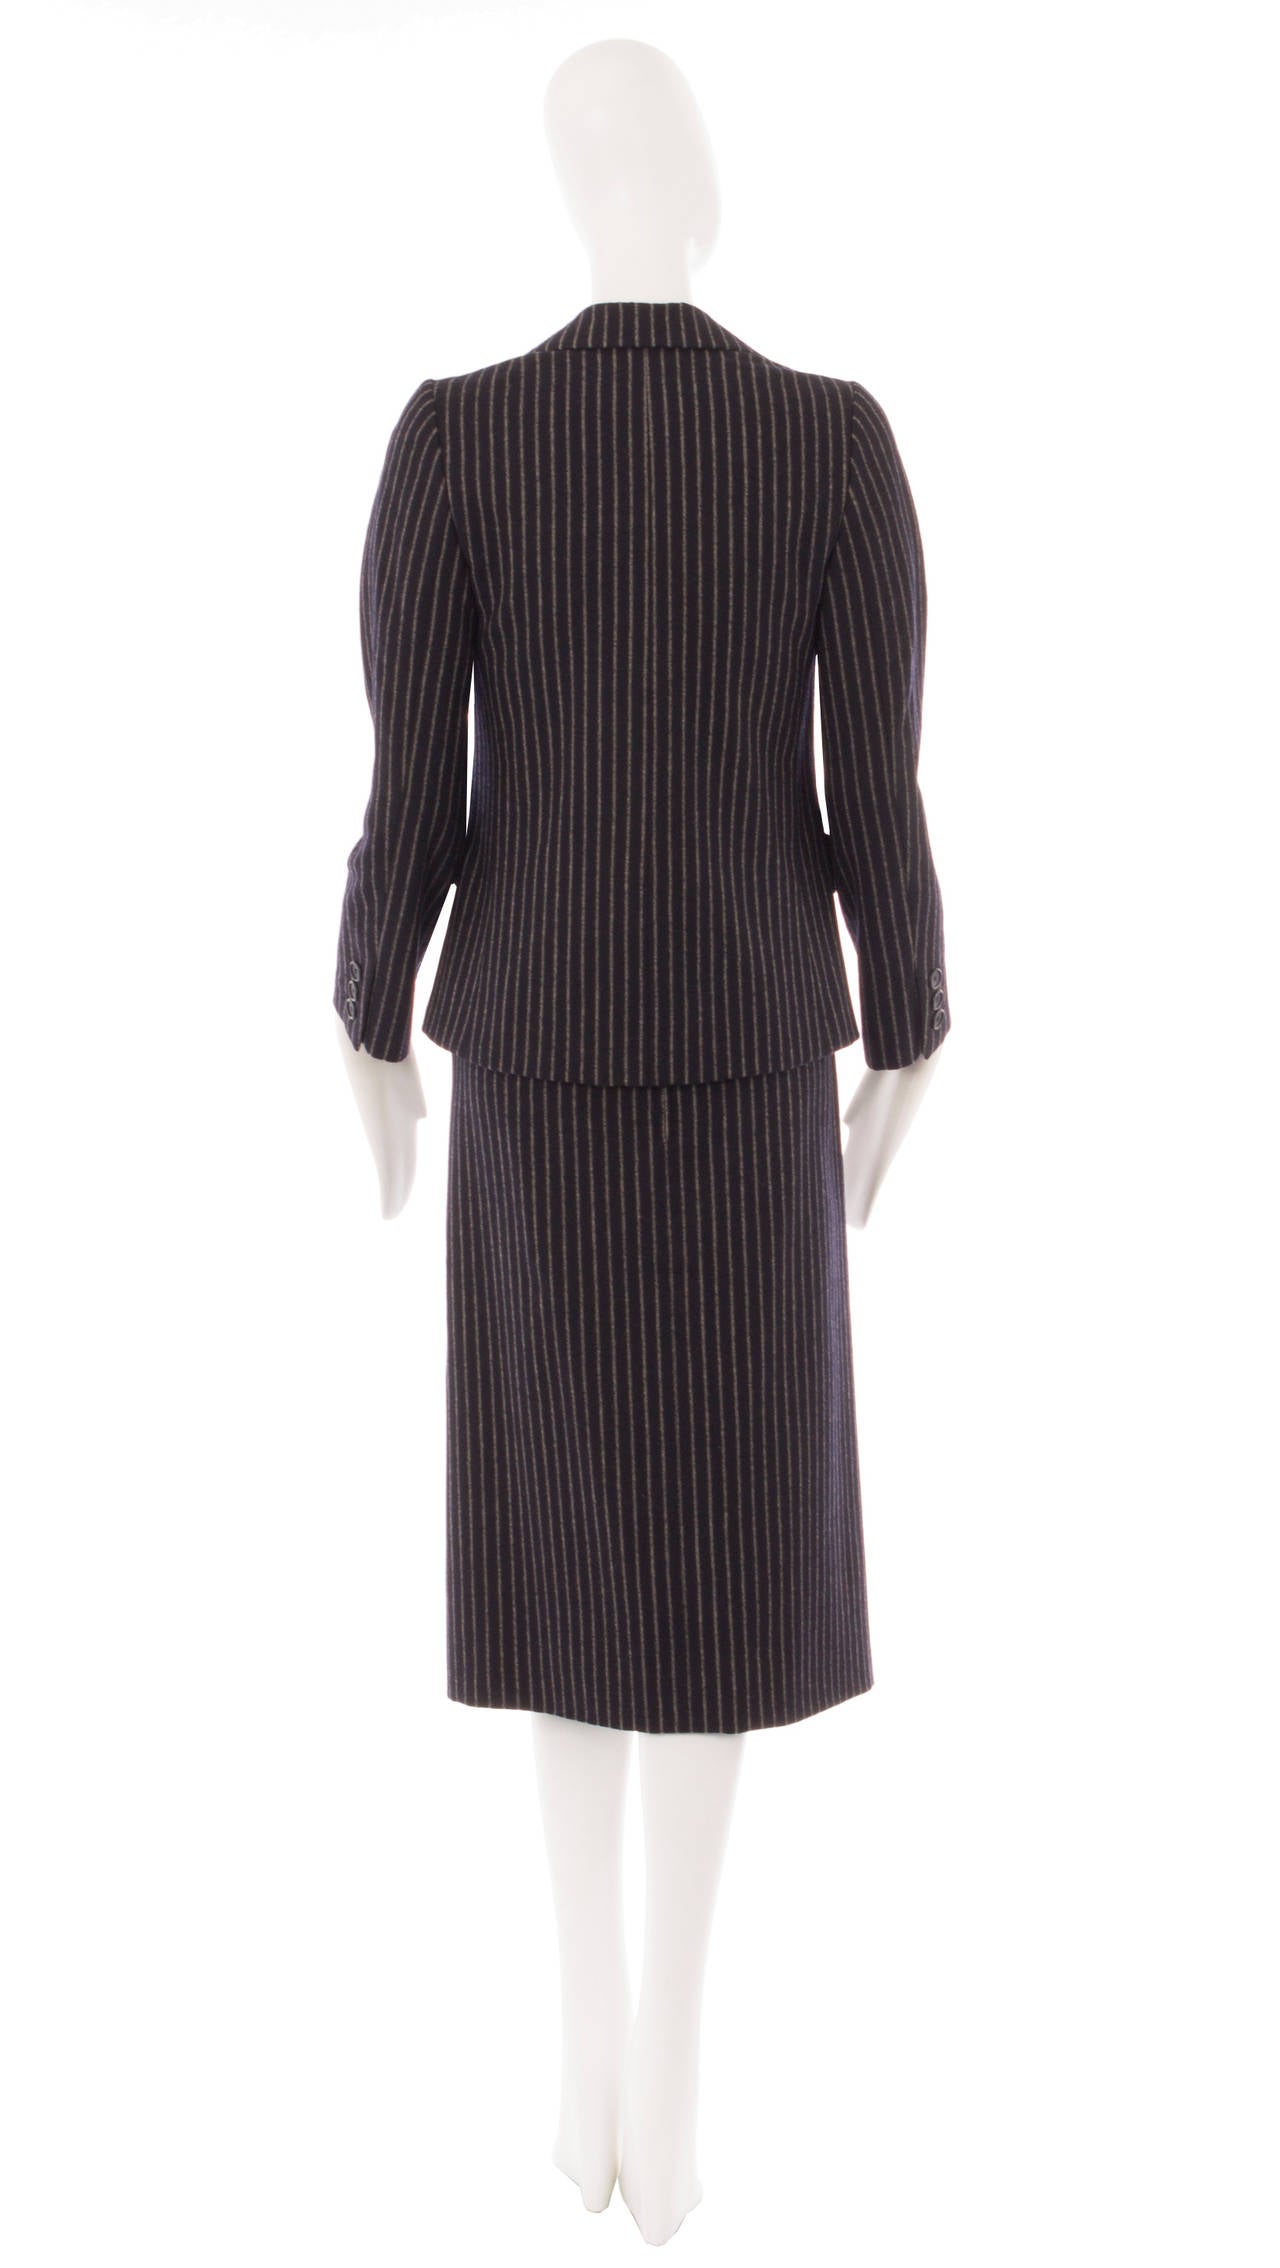 Dior Haute Couture Wool Skirt Suit, Autumn Winter 1974 For Sale at 1stdibs